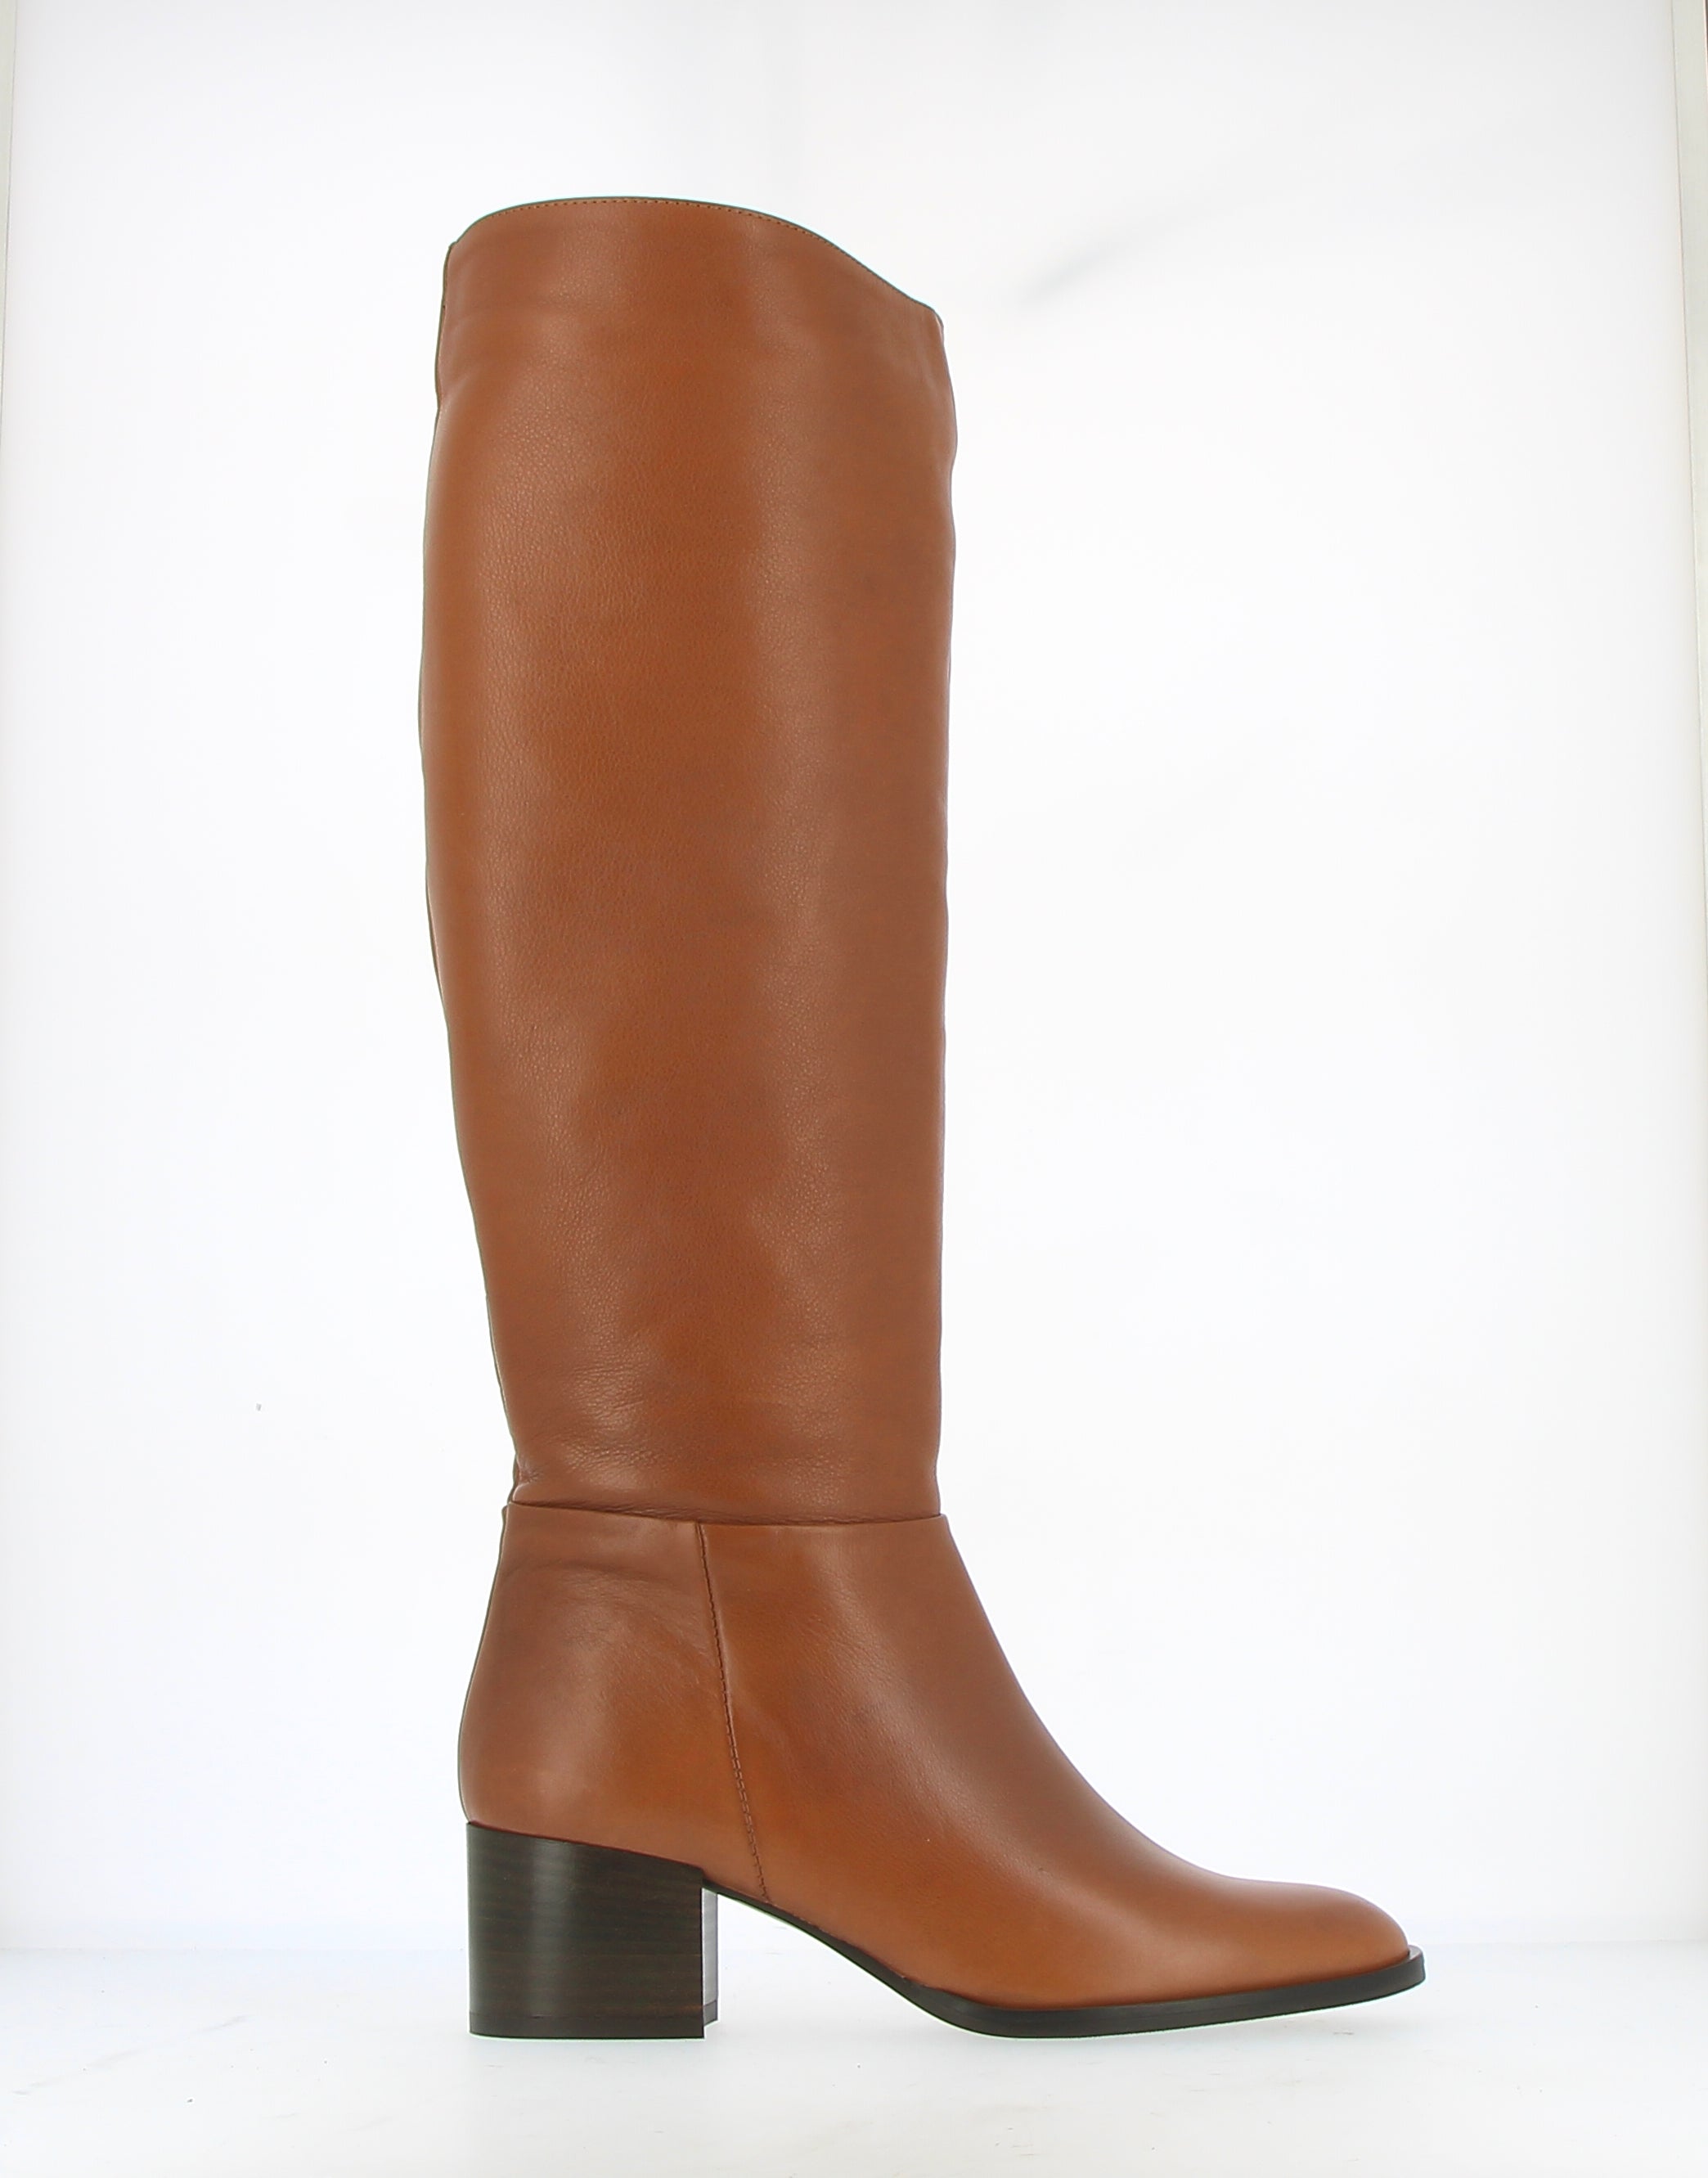 Caramel leather high boot